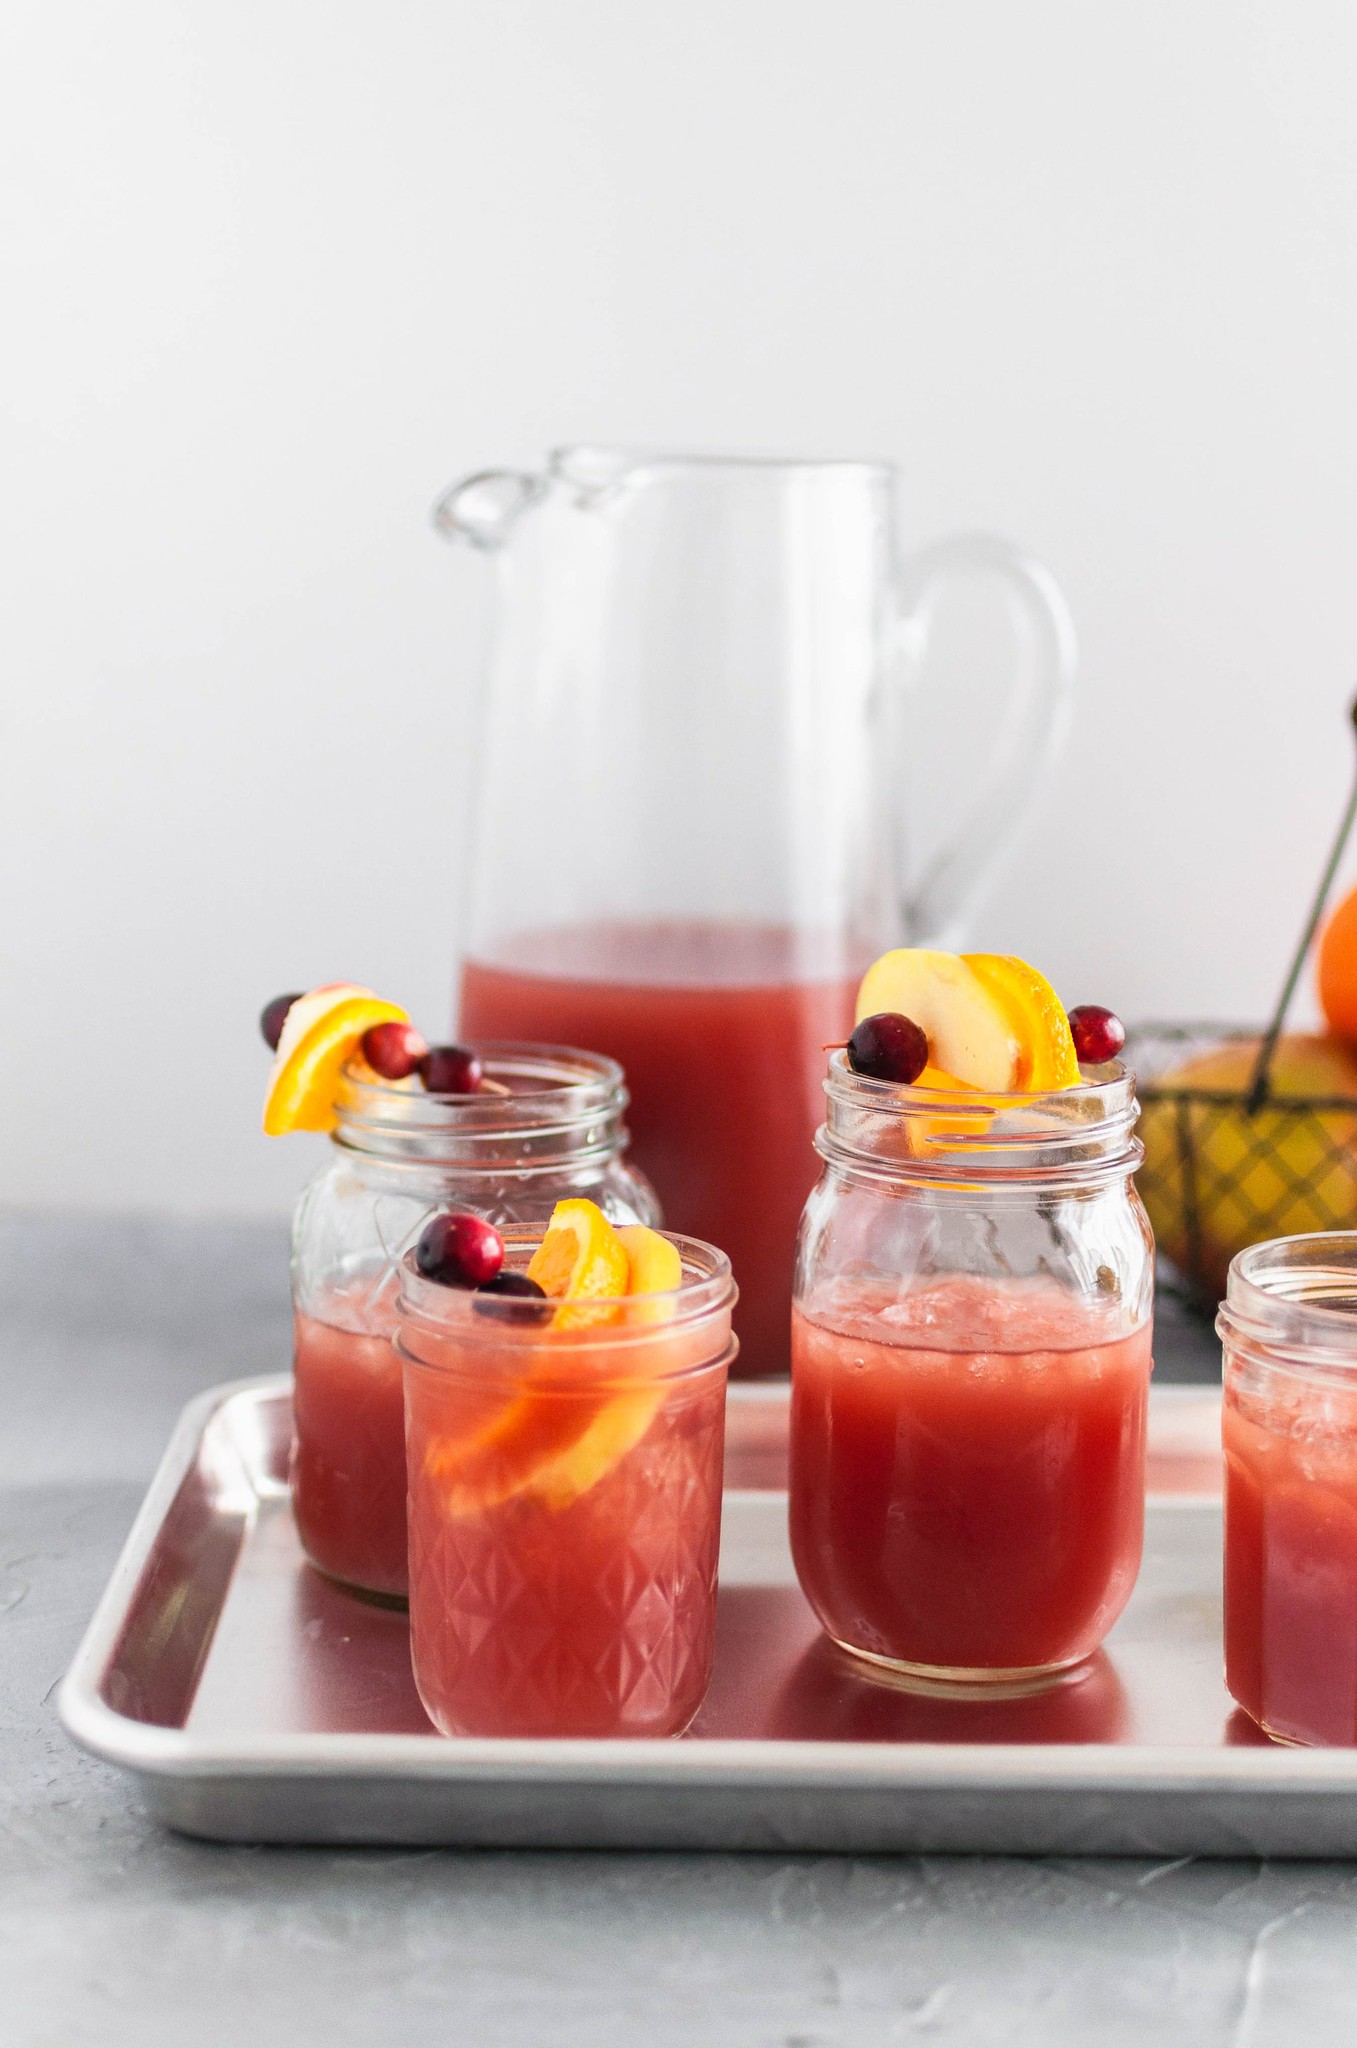 Thanksgiving Punch is just what any holiday needs. Orange juice, cranberry juice, apple cider and ginger beer combines to the most delicious beverage for fall.